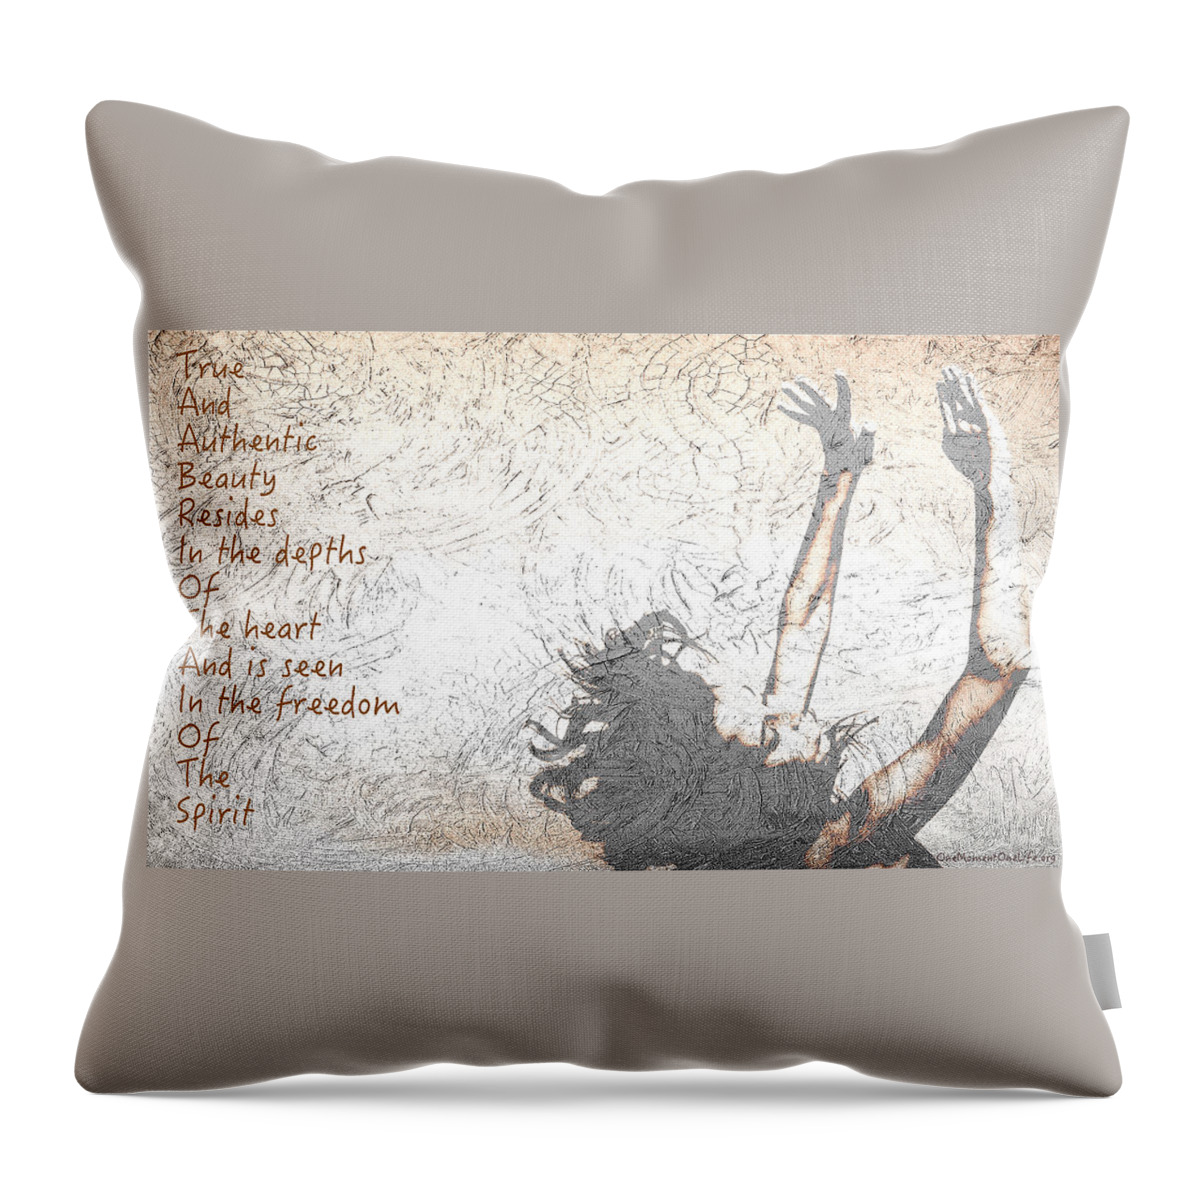 Acrylic Throw Pillow featuring the painting Free Spirit by Theresa Marie Johnson